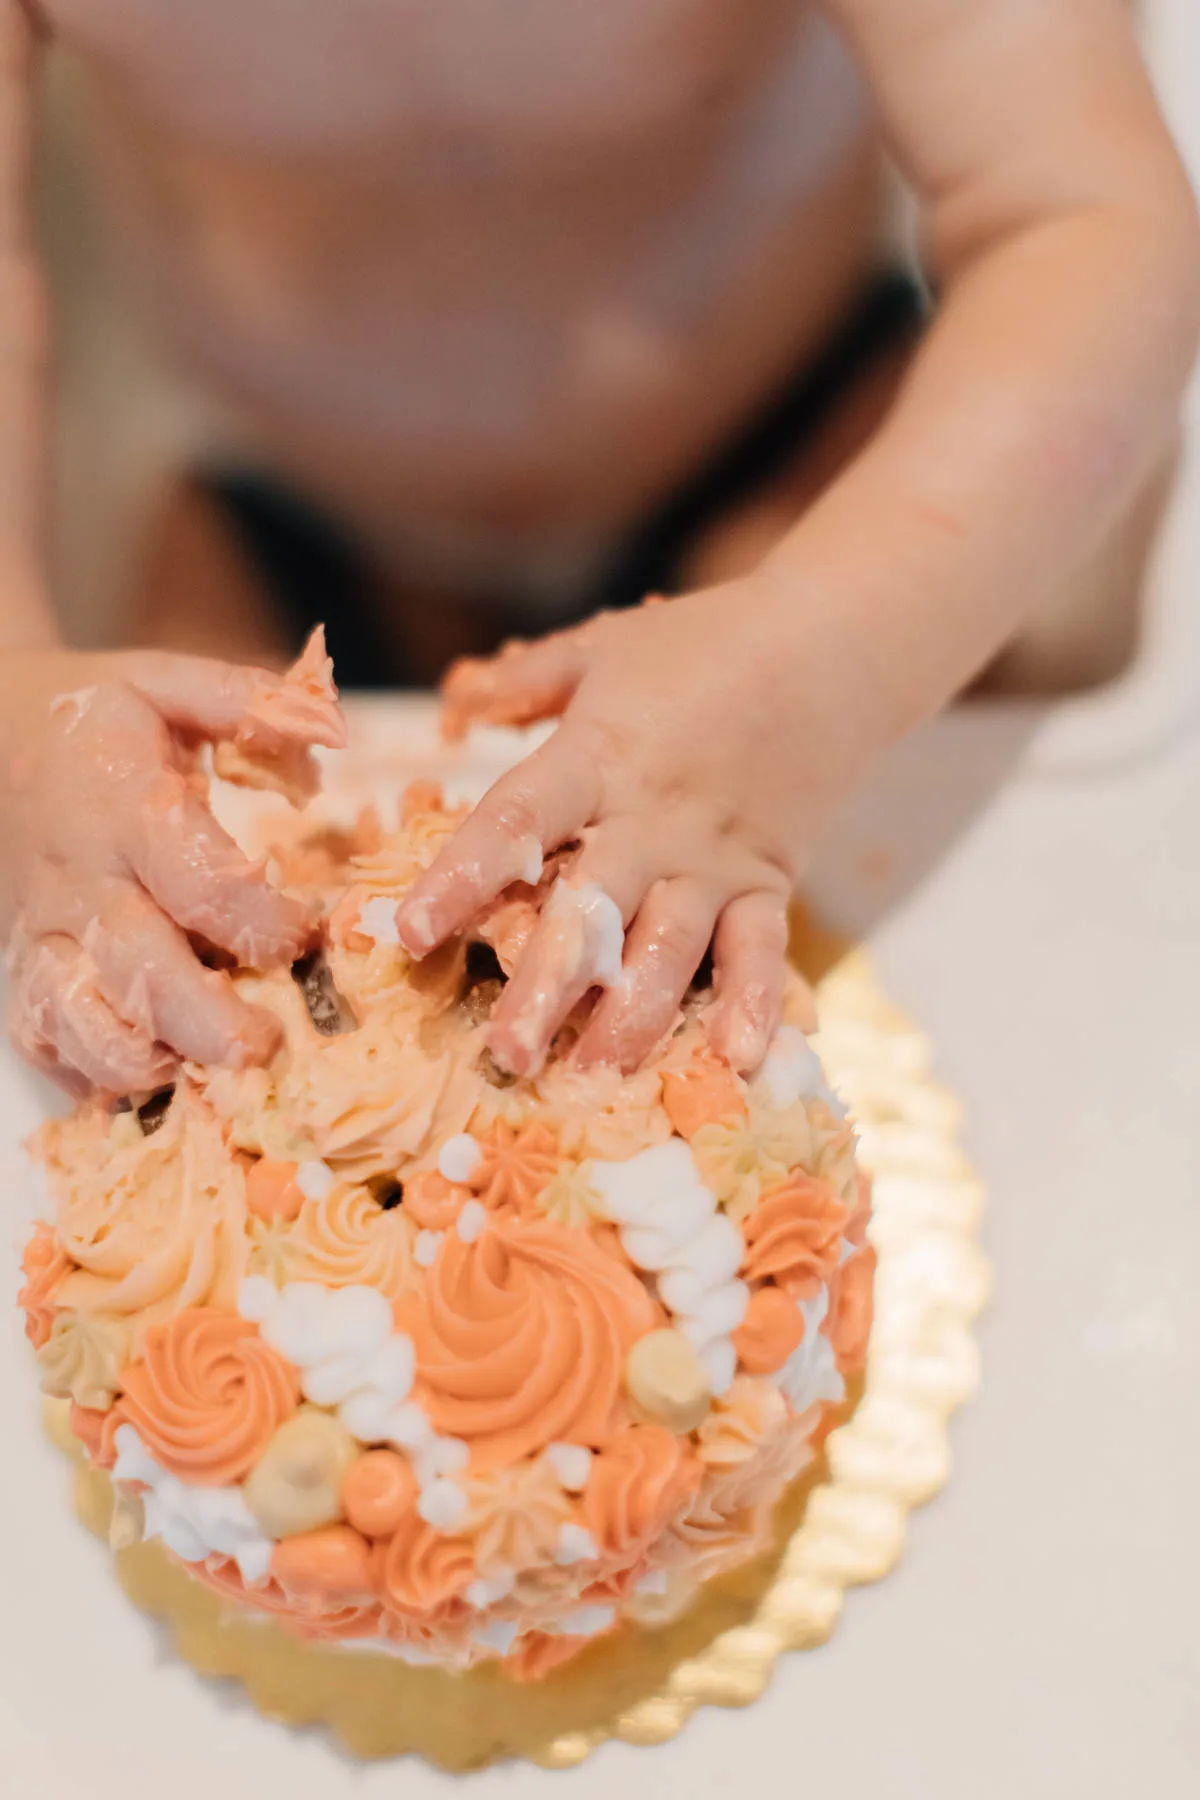 Baby plays in white, pink, and tan frosting on smash cake.